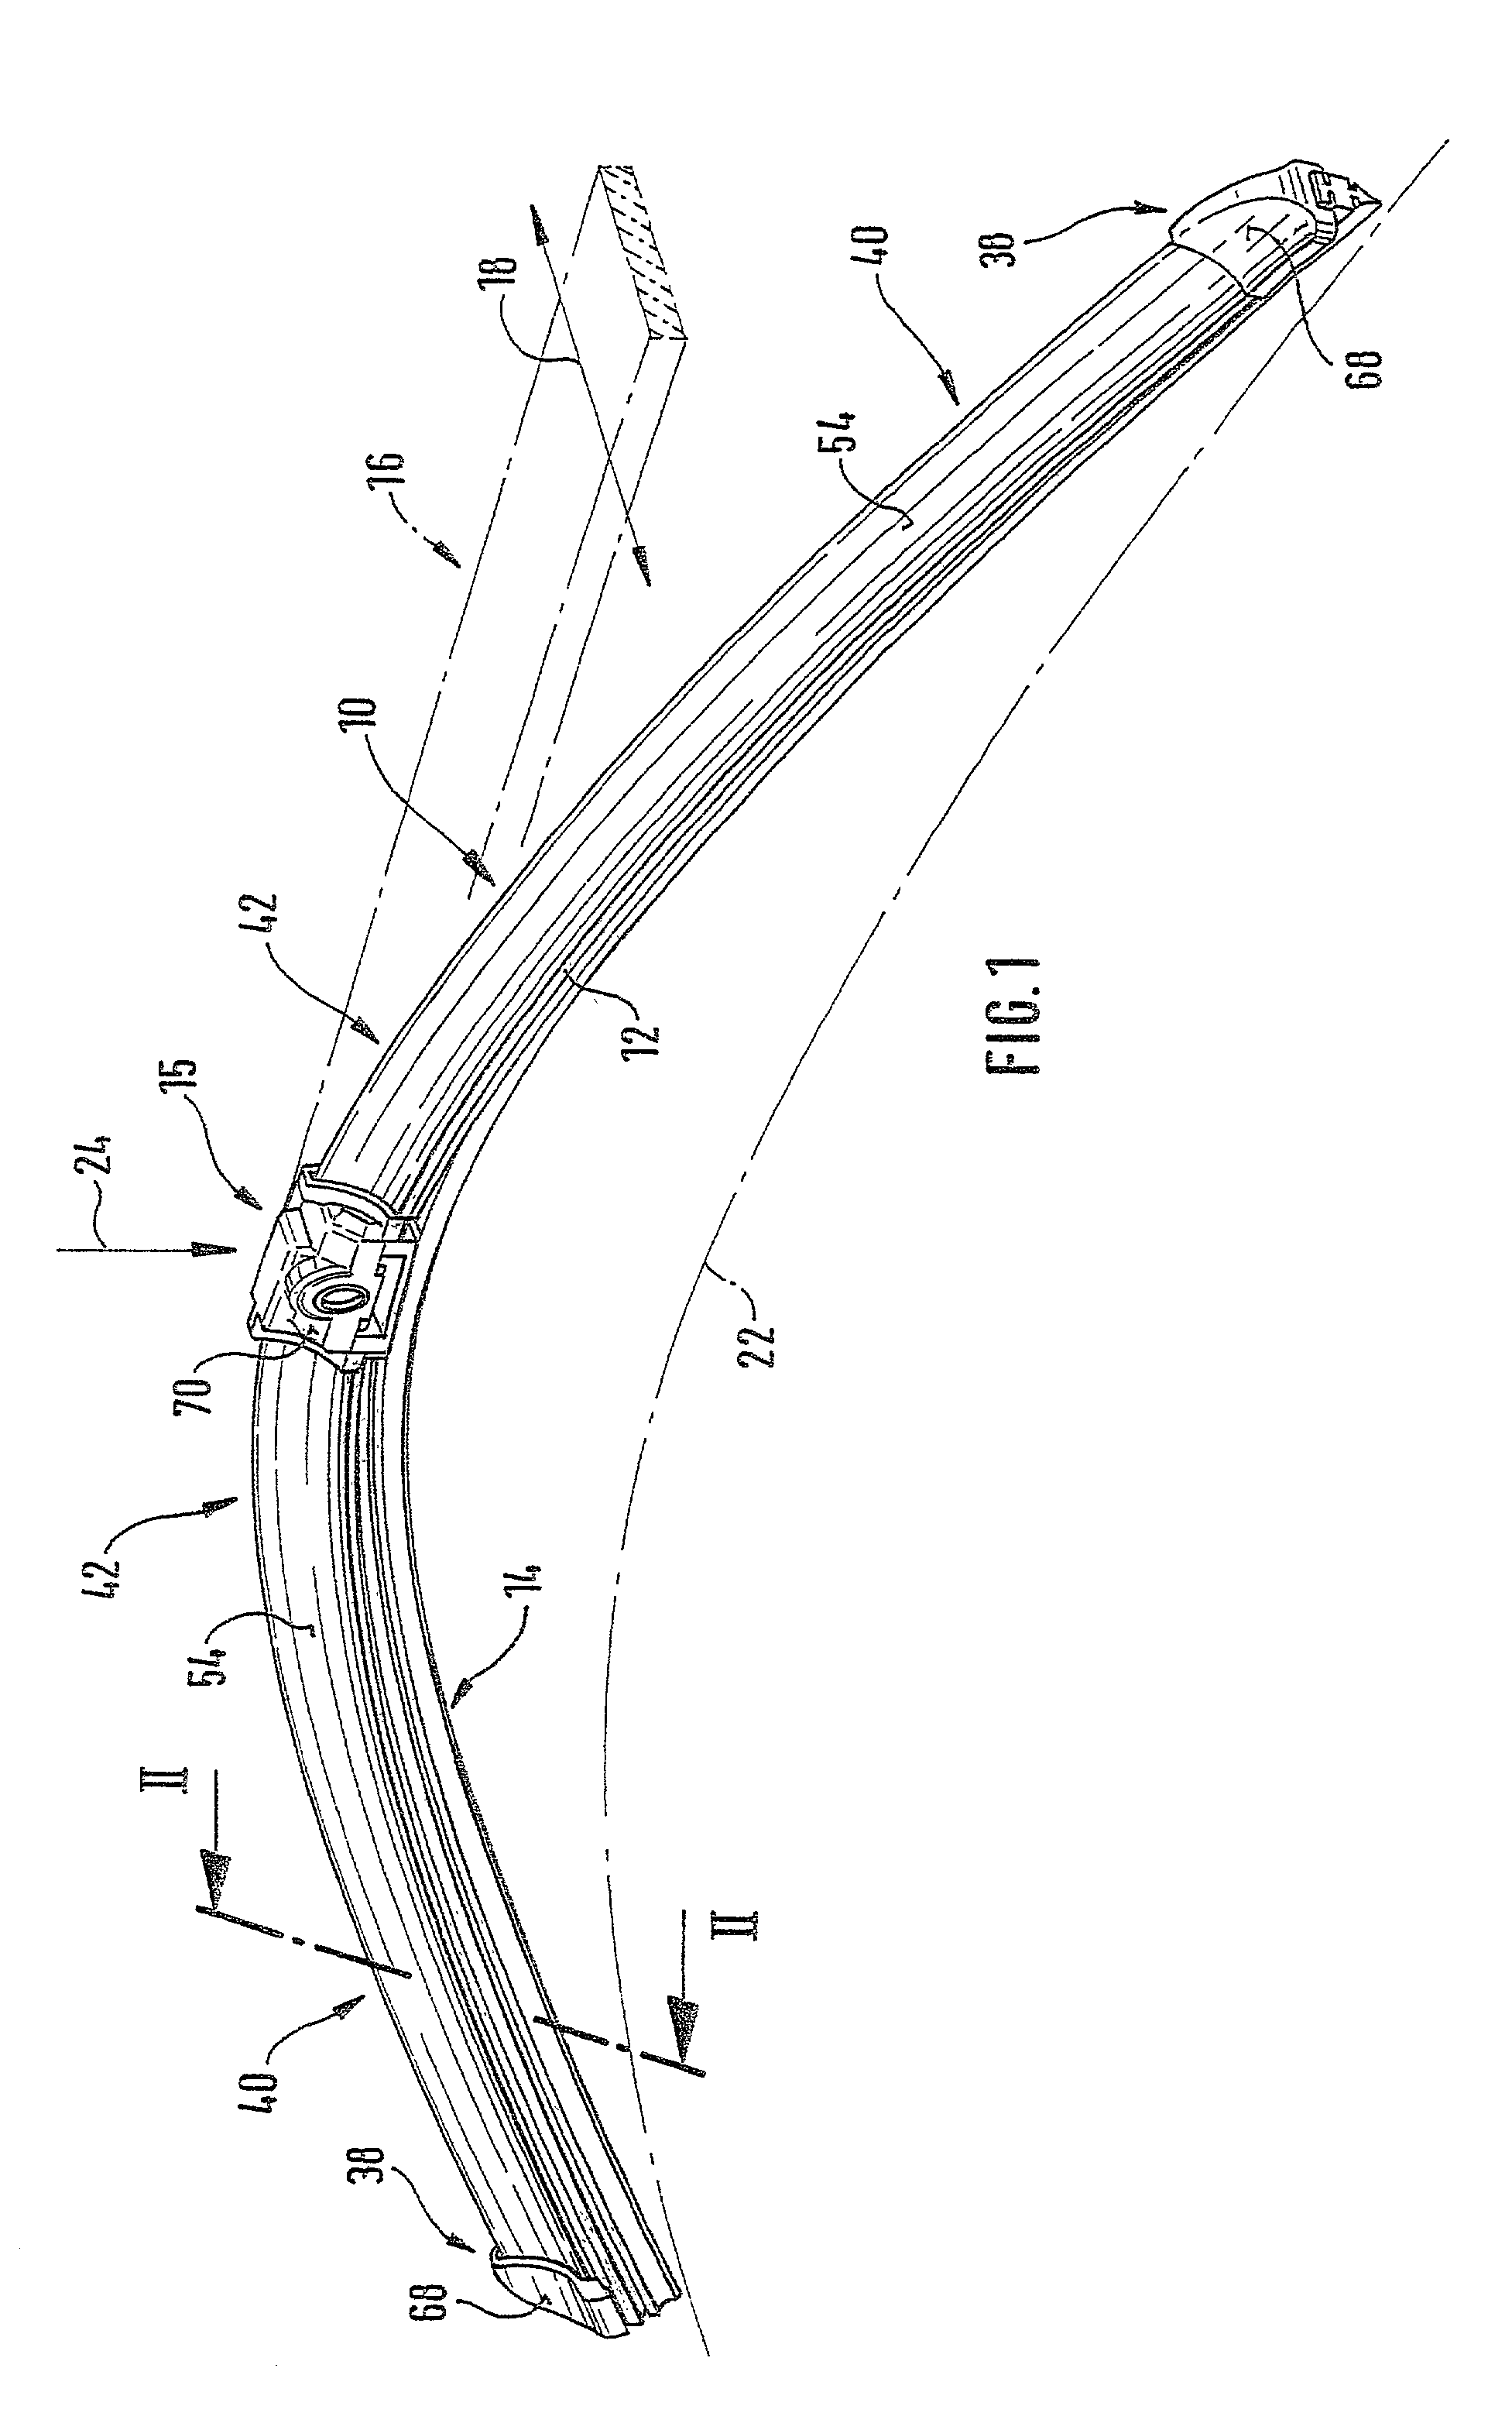 Wiper blade for cleaning screens in particular on motor vehicles